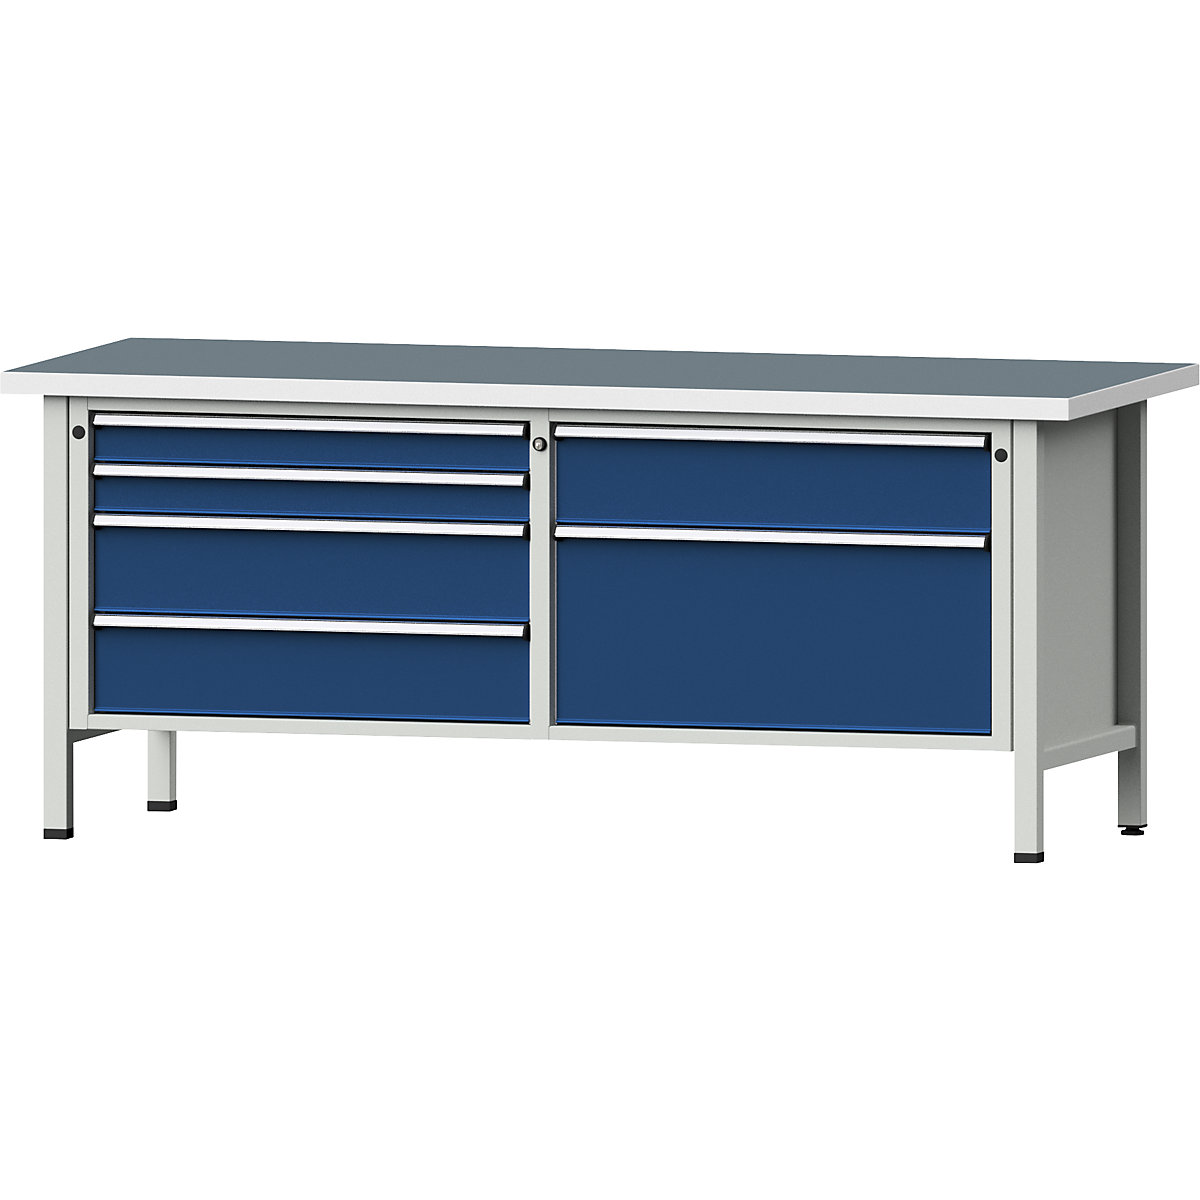 Workbenches 2000 mm wide, frame construction – ANKE, 6 drawers, universal worktop, height 840 mm-7